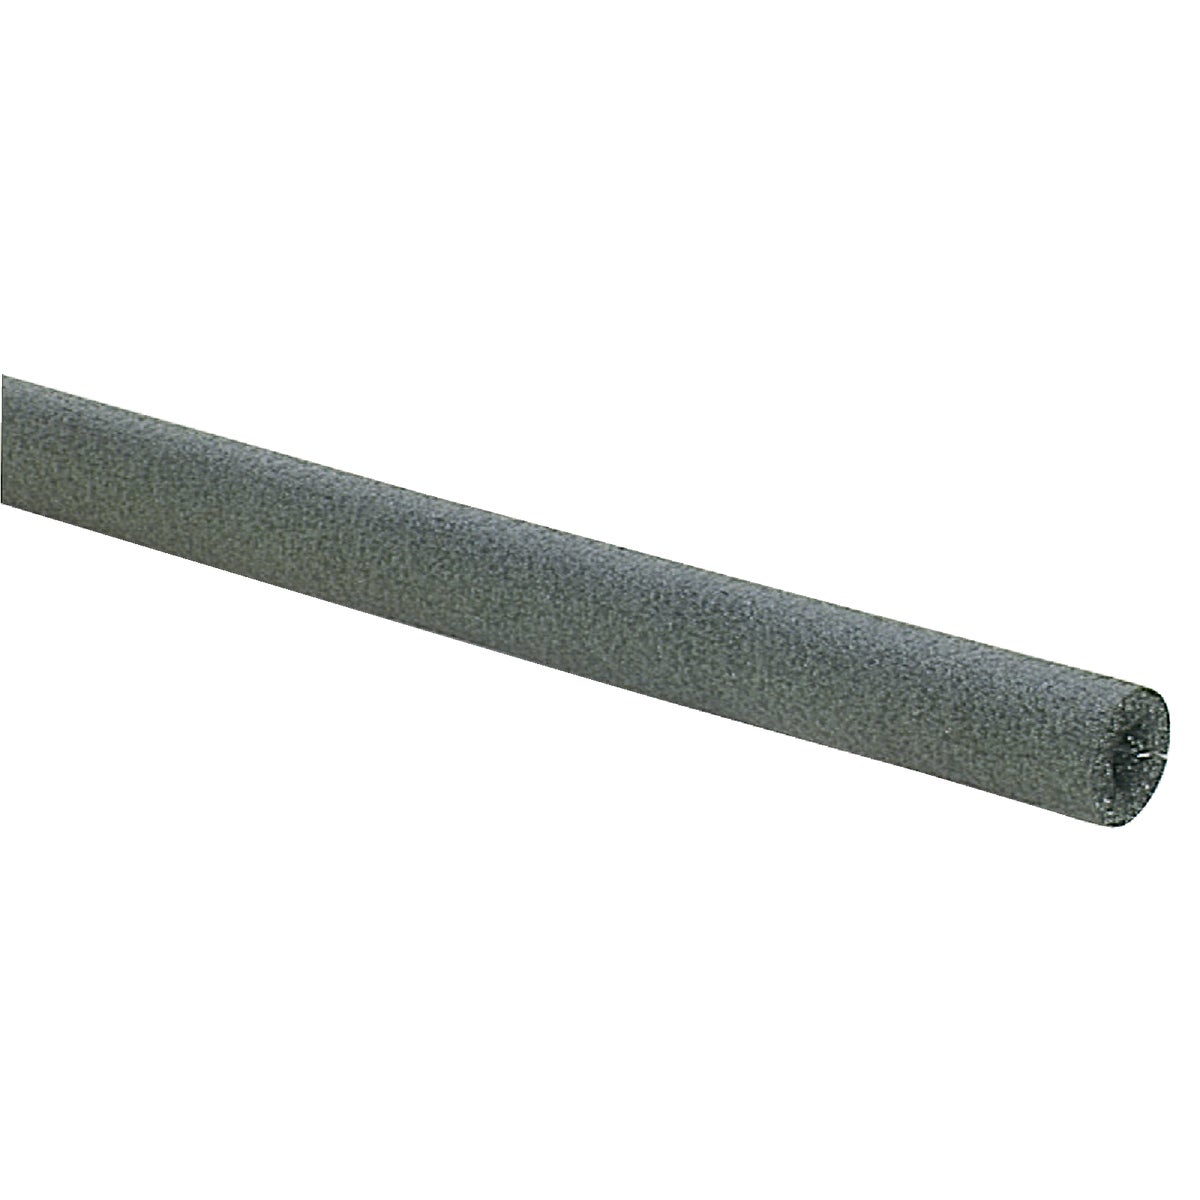 Tundra 1/2 In. Wall Self-Sealing Polyethylene Pipe Insulation Wrap, 1/2 In. x 6 Ft. Fits Pipe Size 1/2 In. Copper / 3/8 In. Iron